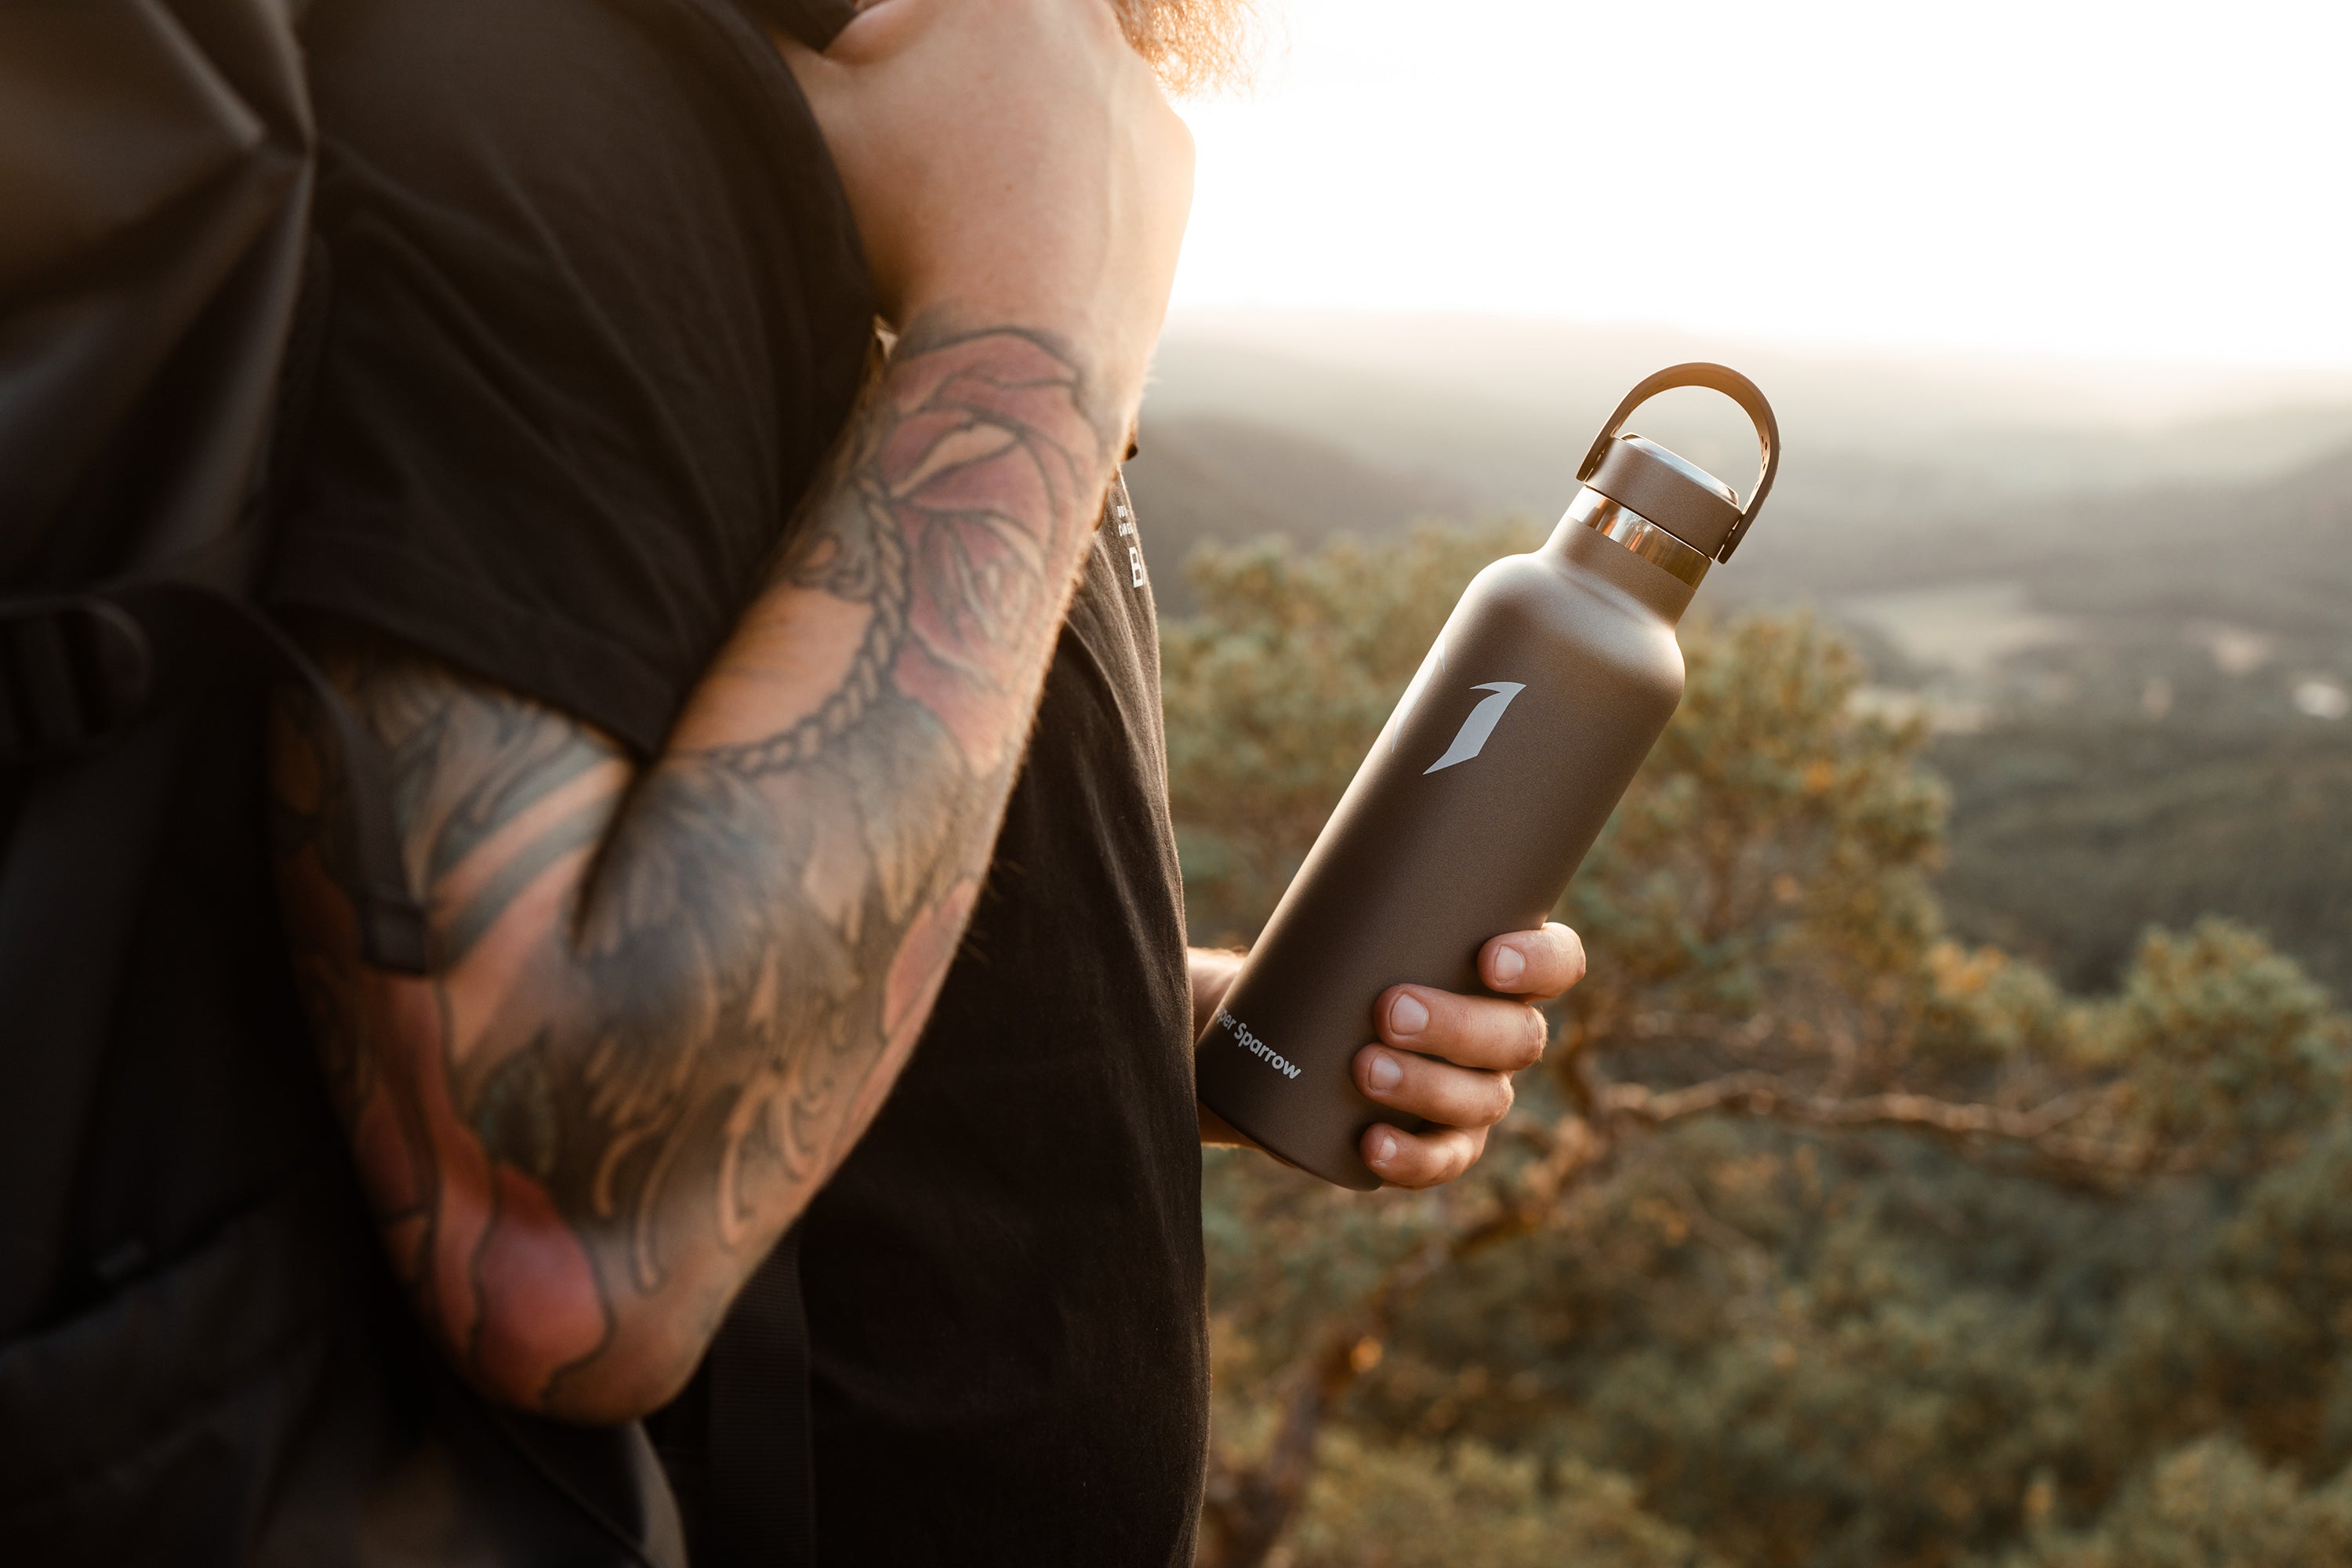 Super Sparrow Stainless Steel Water Bottle - 350ml - Vacuum Insulated Metal  Water Bottle - Standard Mouth Flask - BPA Free - Straw Water Bottle for